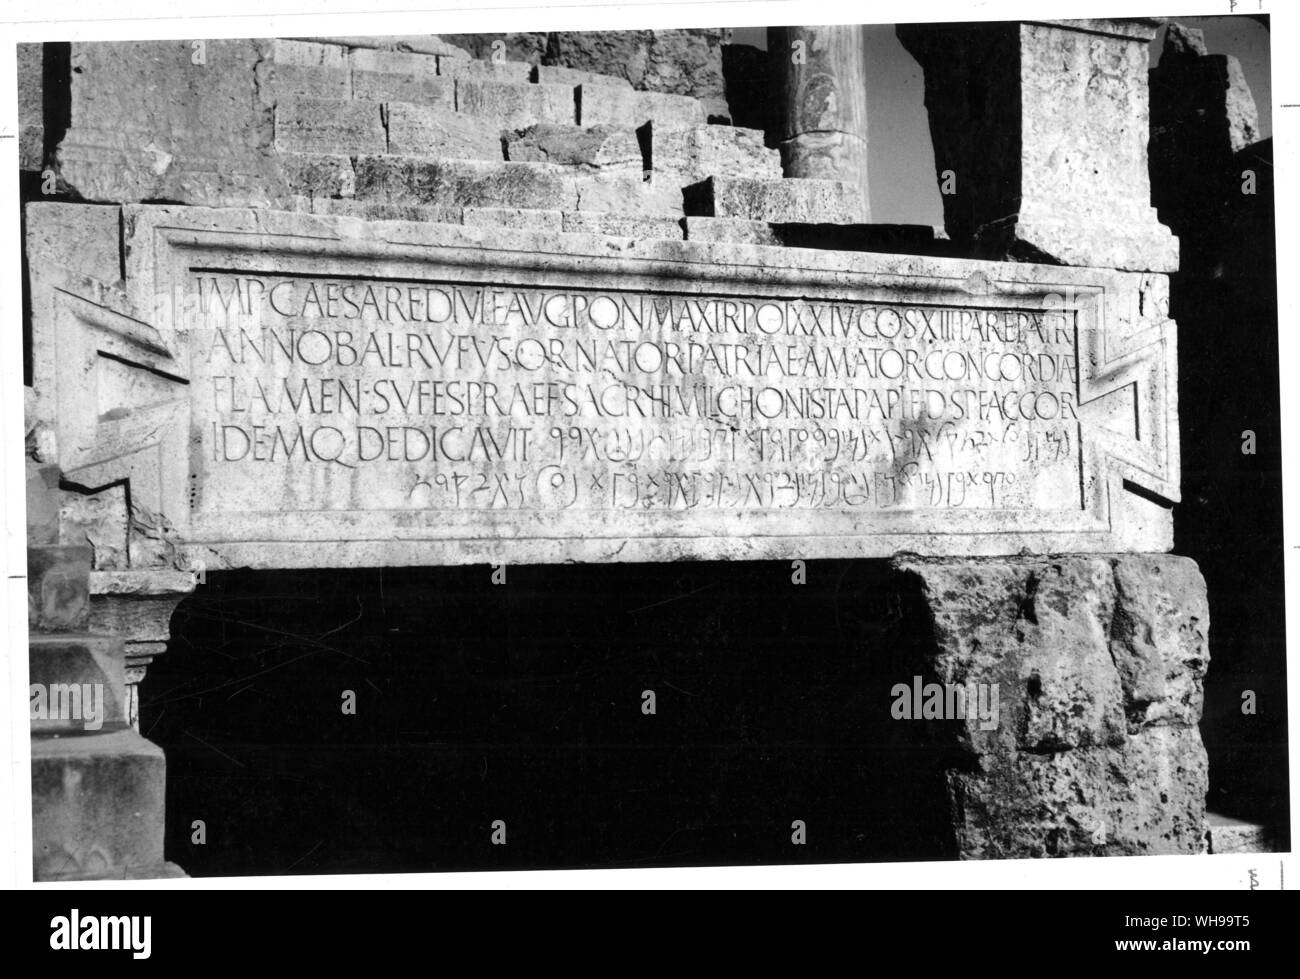 Italy/Early civilisation/Etruscans: A bilingual dedication in Latin and Punic over the main entrance to the great theatre of Leptis Magna Tripoli. Stock Photo